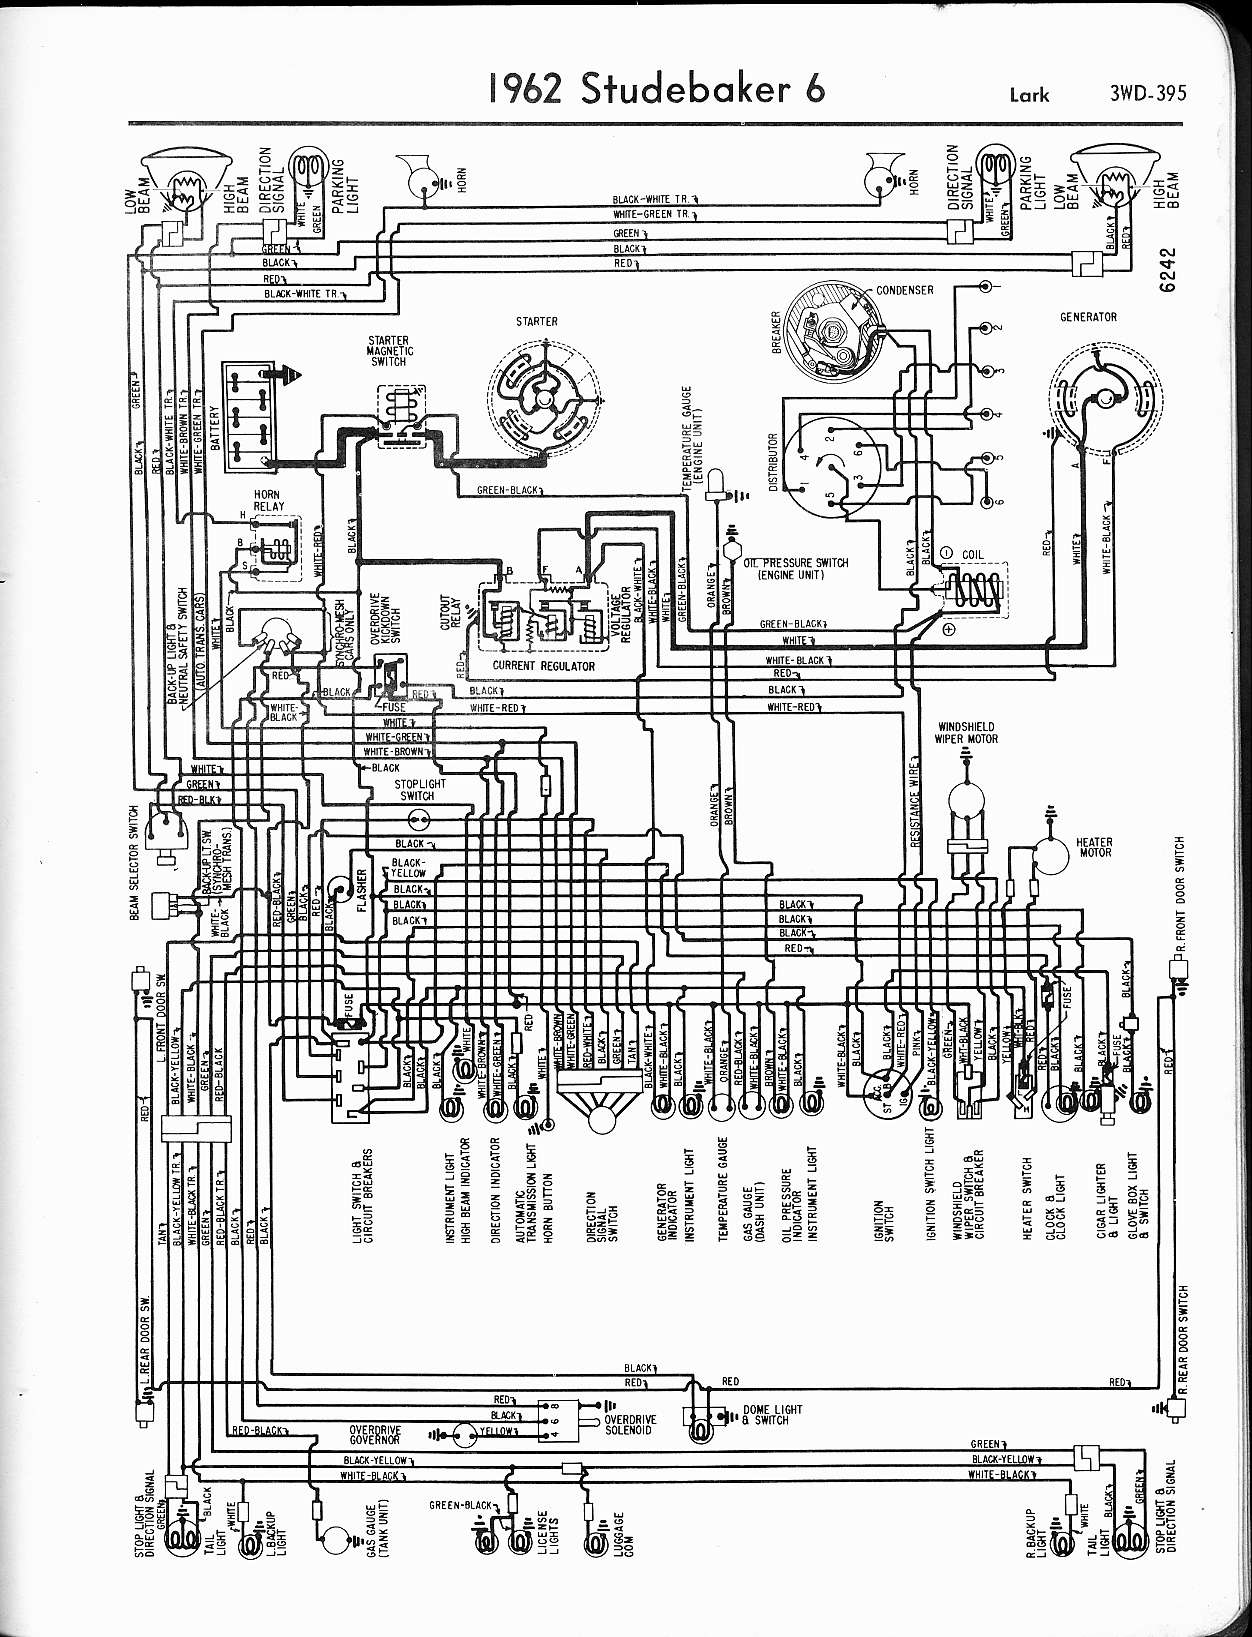 Studebaker wiring diagrams - The Old Car Manual Project dodge d100 wiring diagram 